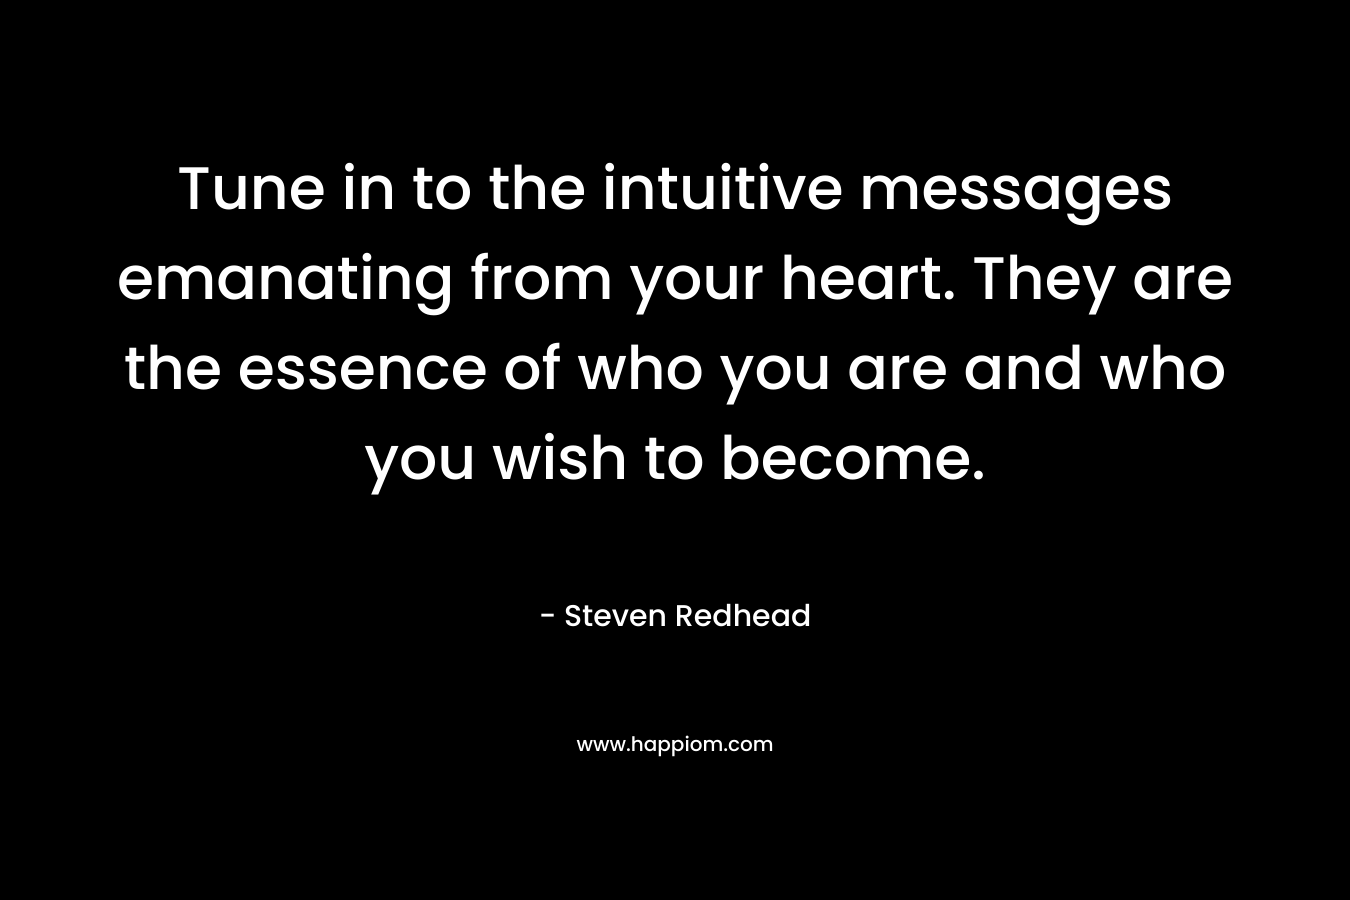 Tune in to the intuitive messages emanating from your heart. They are the essence of who you are and who you wish to become. – Steven Redhead